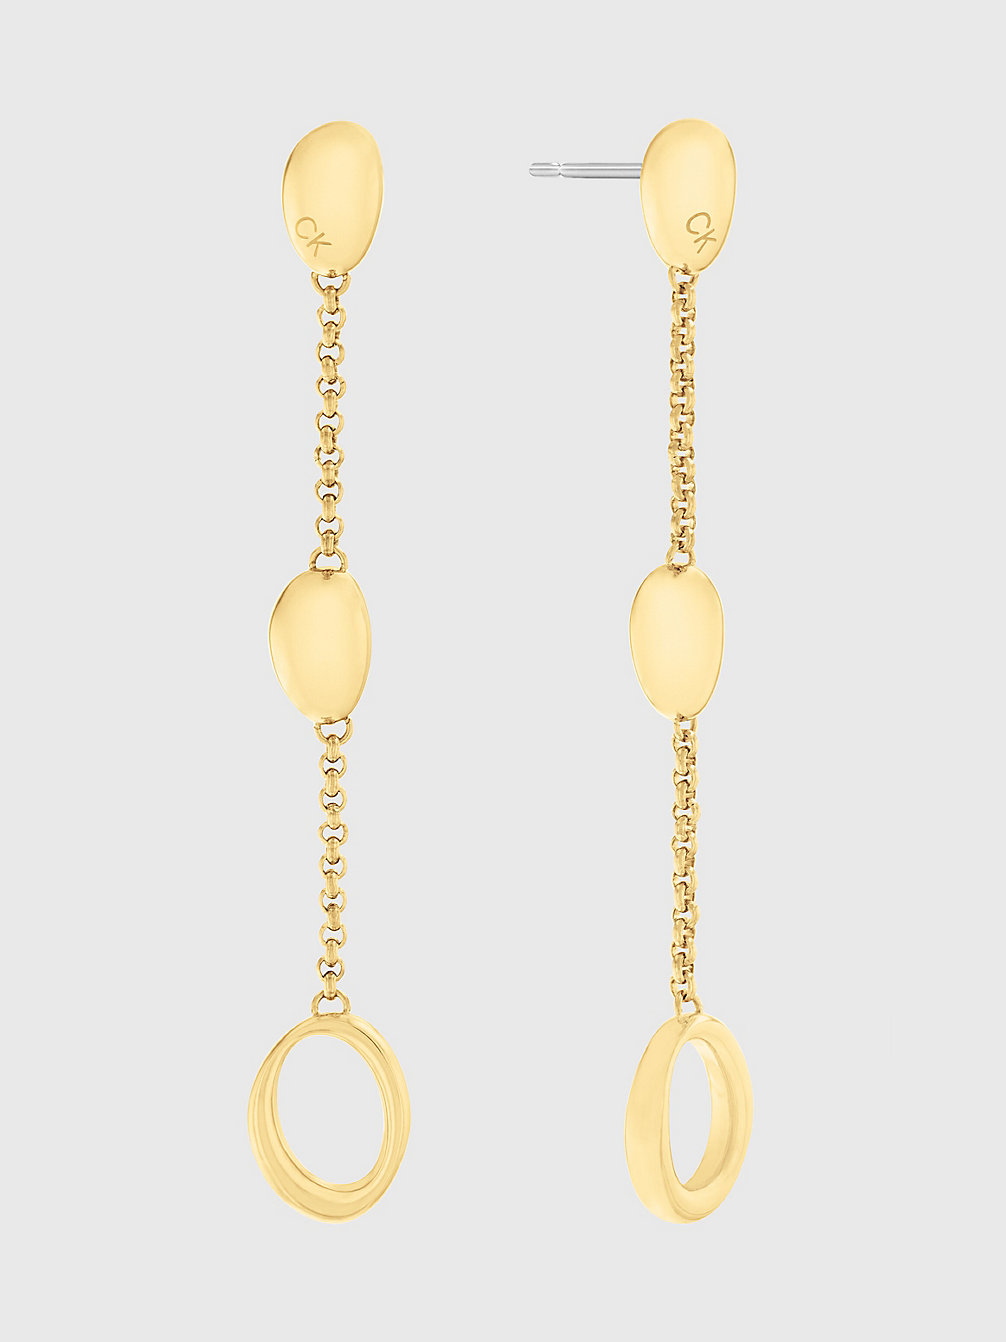 Pendientes - Playful Organic Shapes > GOLD > undefined mujeres > Calvin Klein